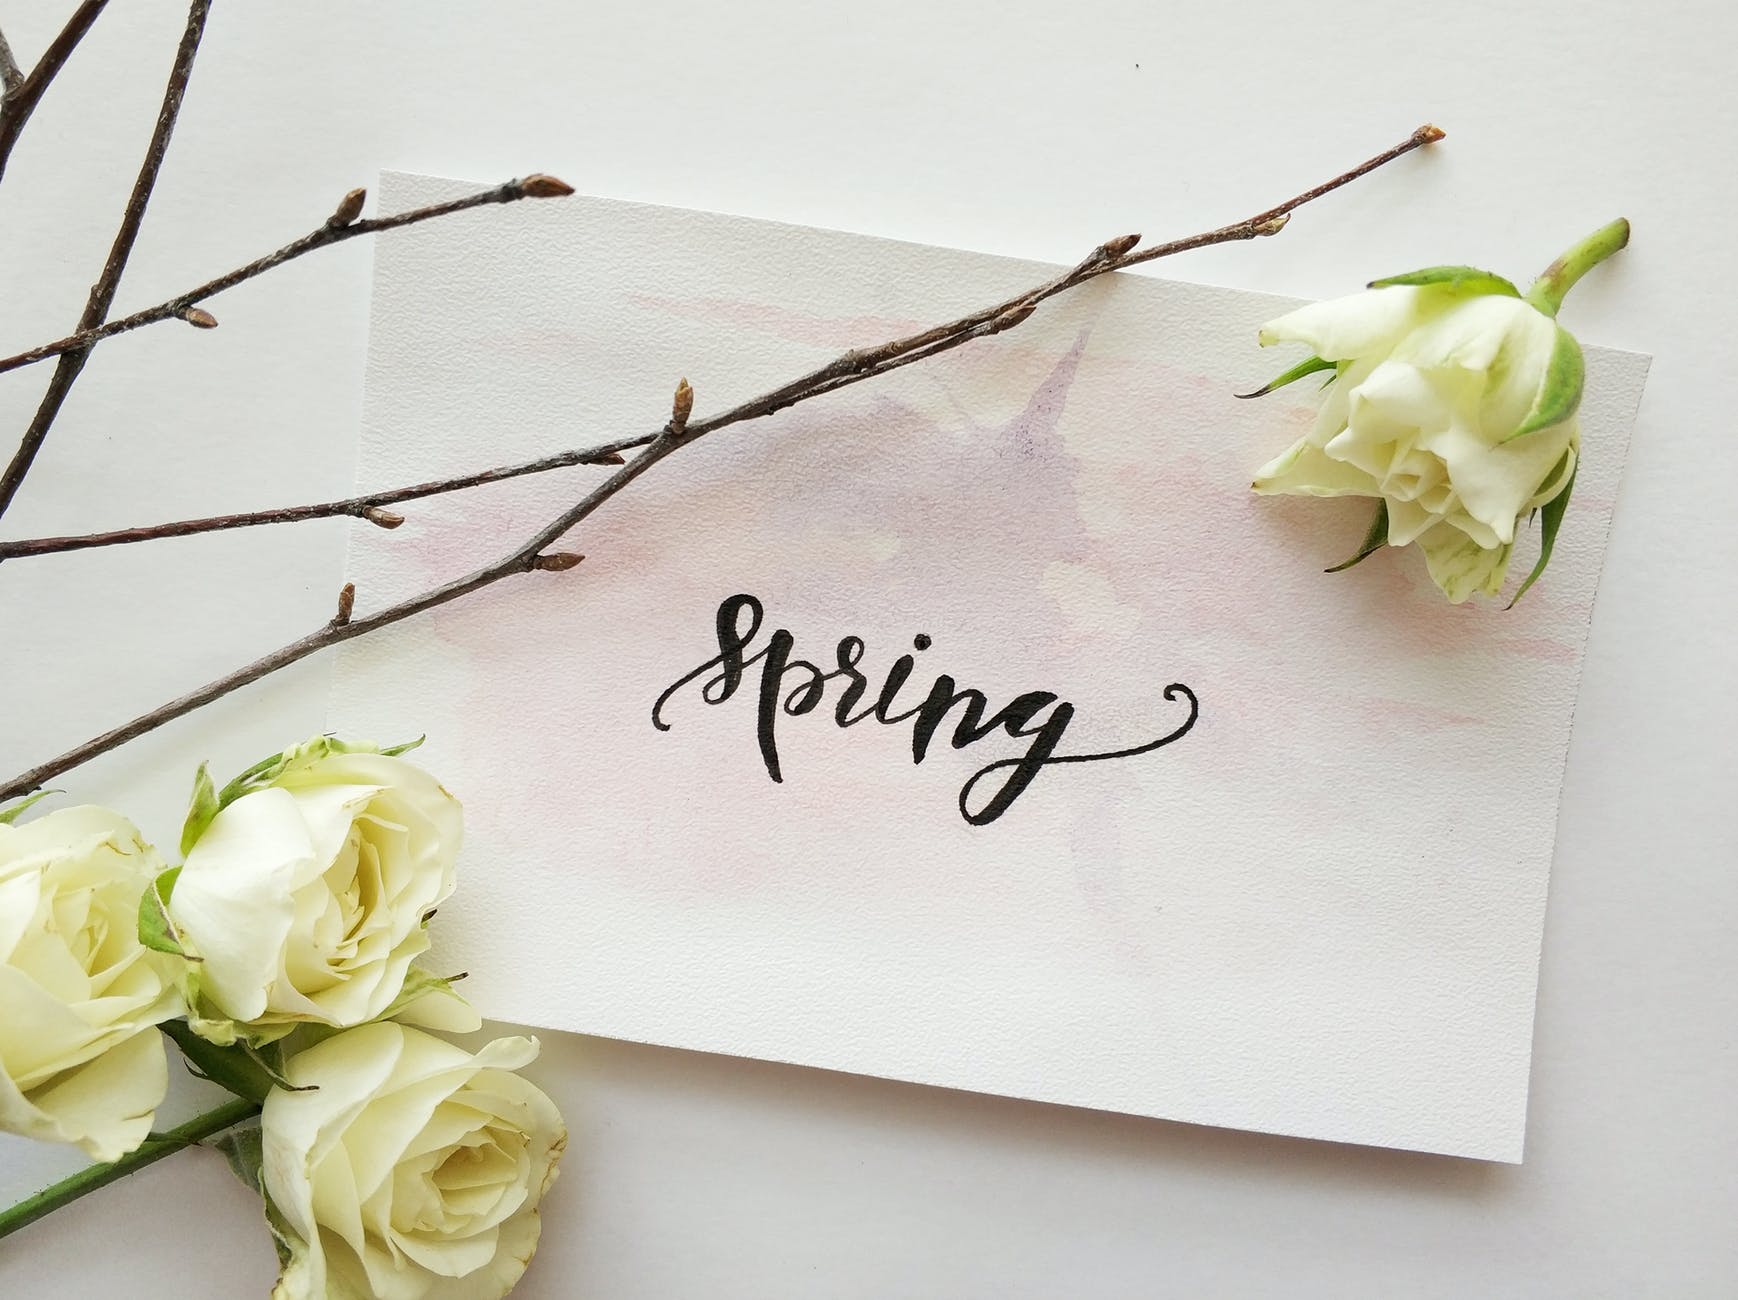 15 Activities we can do in Spring Season